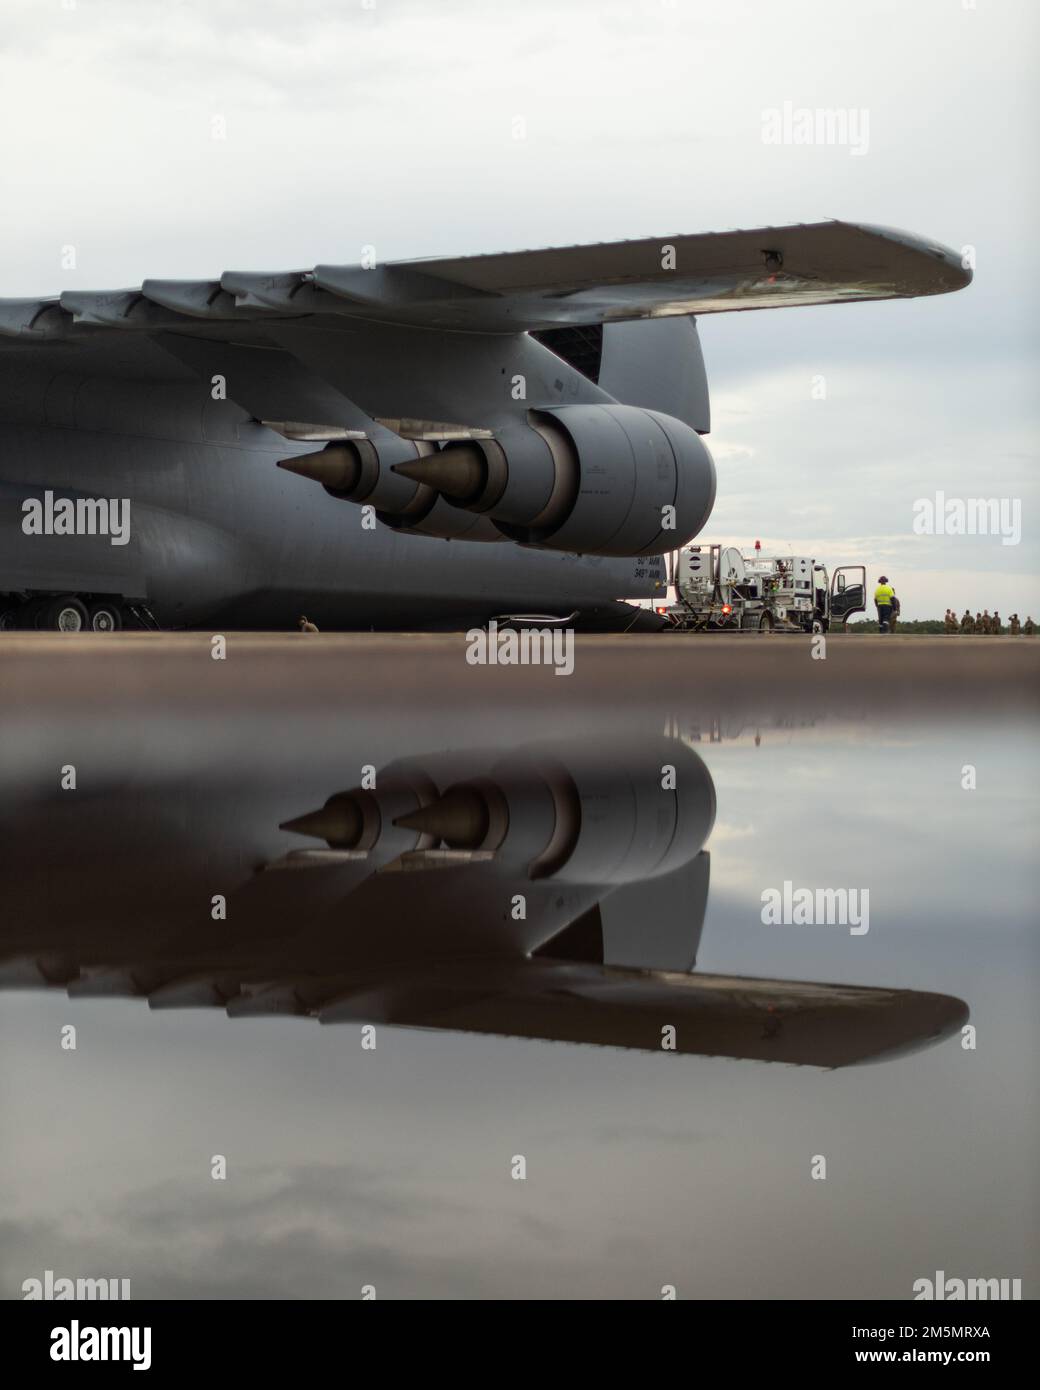 A Lockheed C-5M Super Galaxy, operated by the 22nd Airlift Squadron, Air Mobility Command, sits on the runway while being refueled during a movement of equipment at Royal Australian Air Force Base Darwin, NT, Australia, March 27, 2022. The C-5M will be moving U.S. Marine Corps equipment from Darwin to Okinawa, Japan, an initiative by Marine Rotational Force-Darwin 22, ensuring the equipment is operational to maintain a credible crisis and contingency-ready force that can contribute to a free and open Indo-Pacific region. Stock Photo